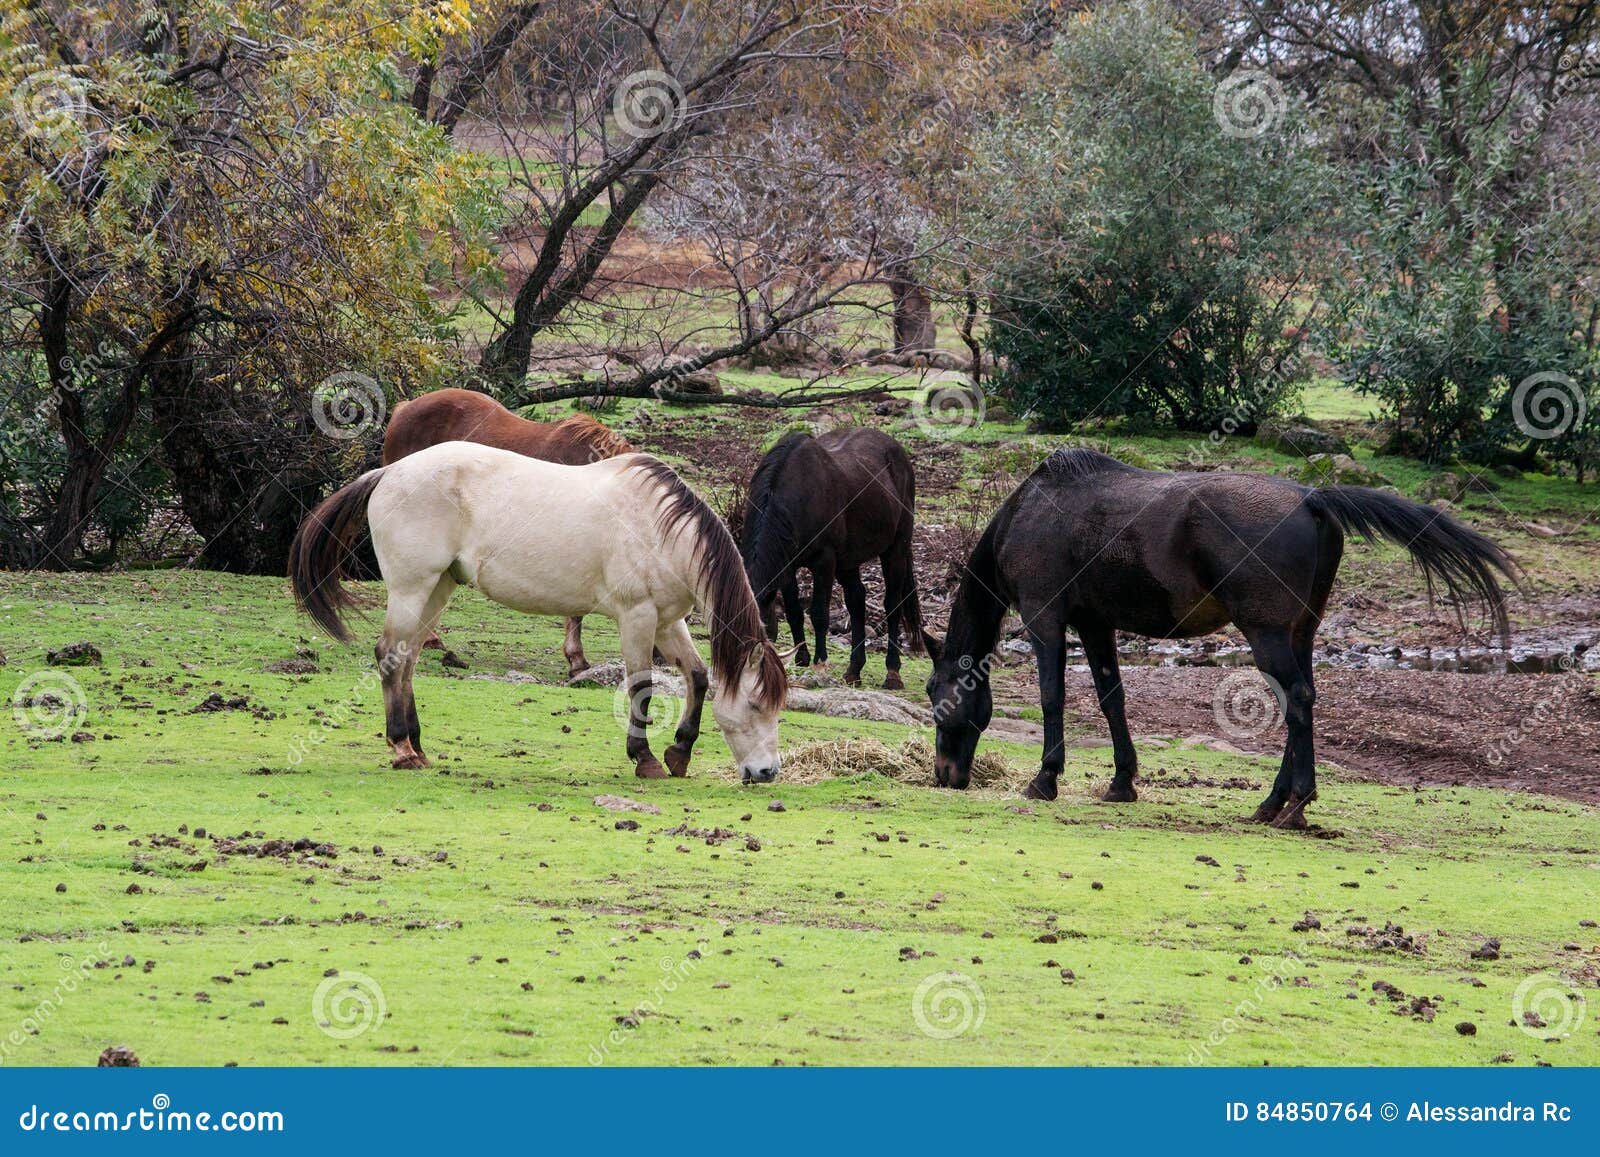 Horses eating together stock photo. Image of ground, mammal - 84850764